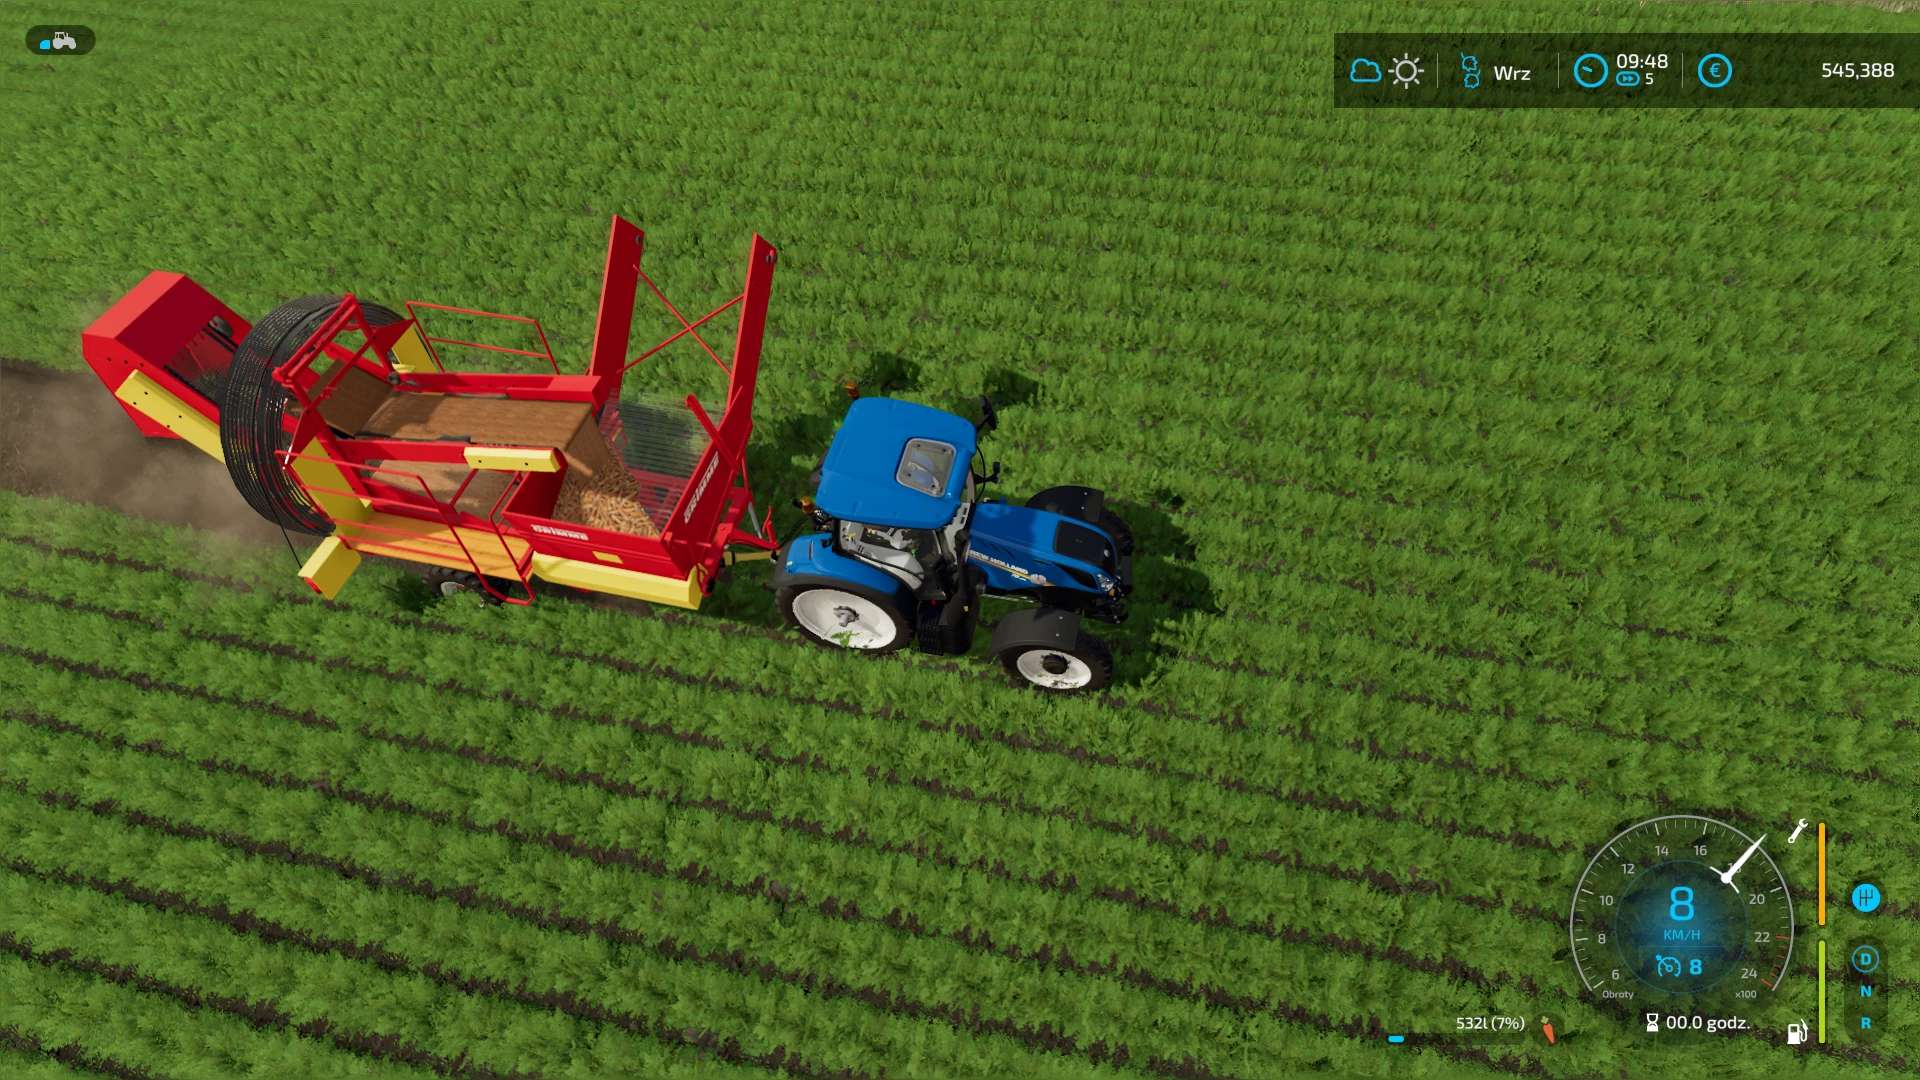 Grimme Dr 1500 Potatoes Carrots Parsnips And Red Beet V10 Fs22 Farming Simulator 22 Mod 4920